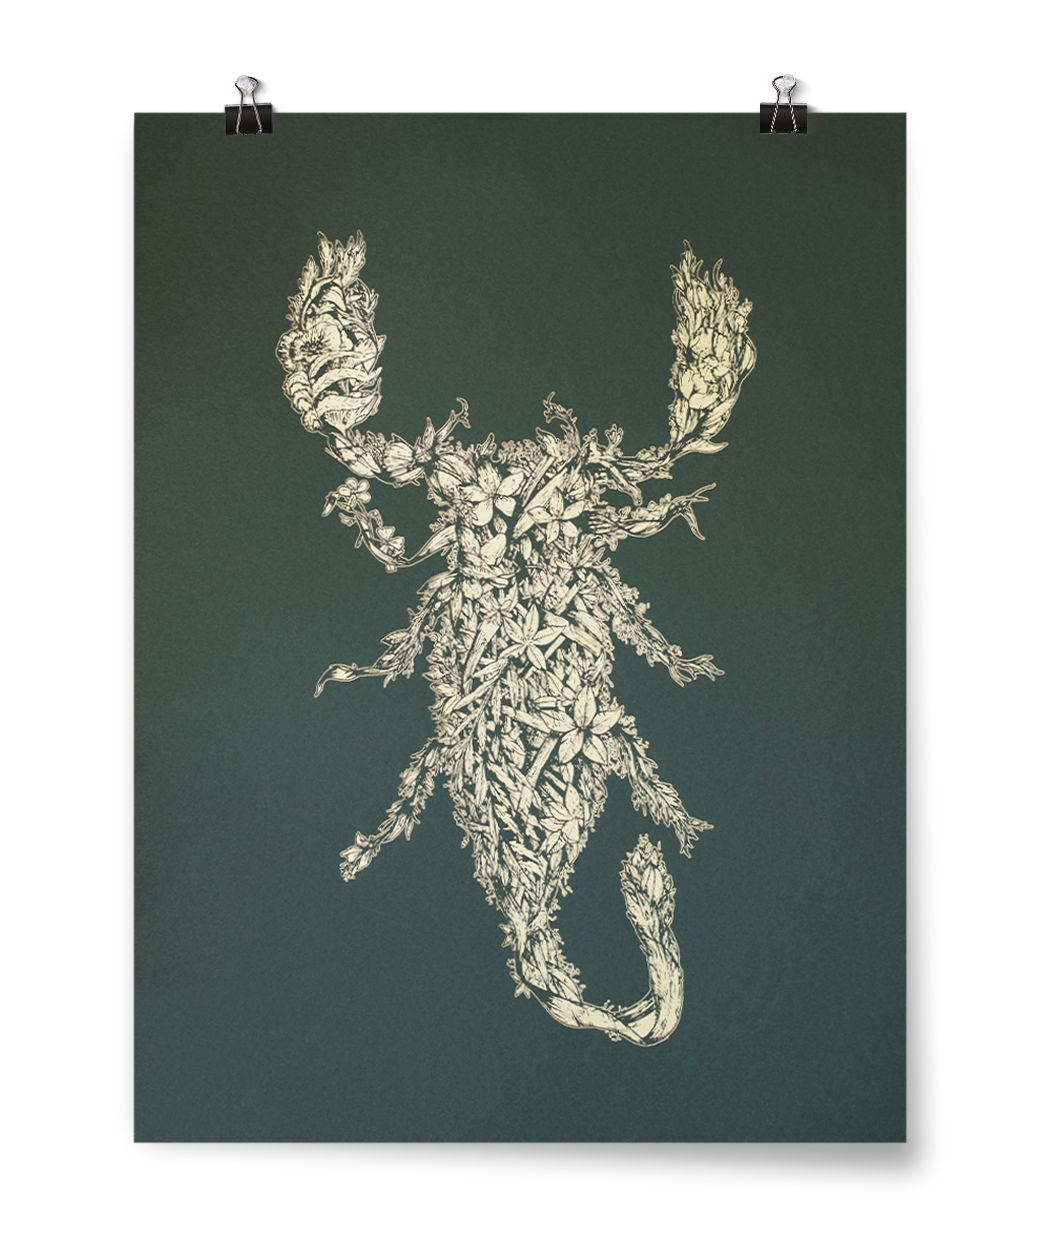 A greek poster with a floral composed scorpion in metallic gold ink - from Tyler Thrasher